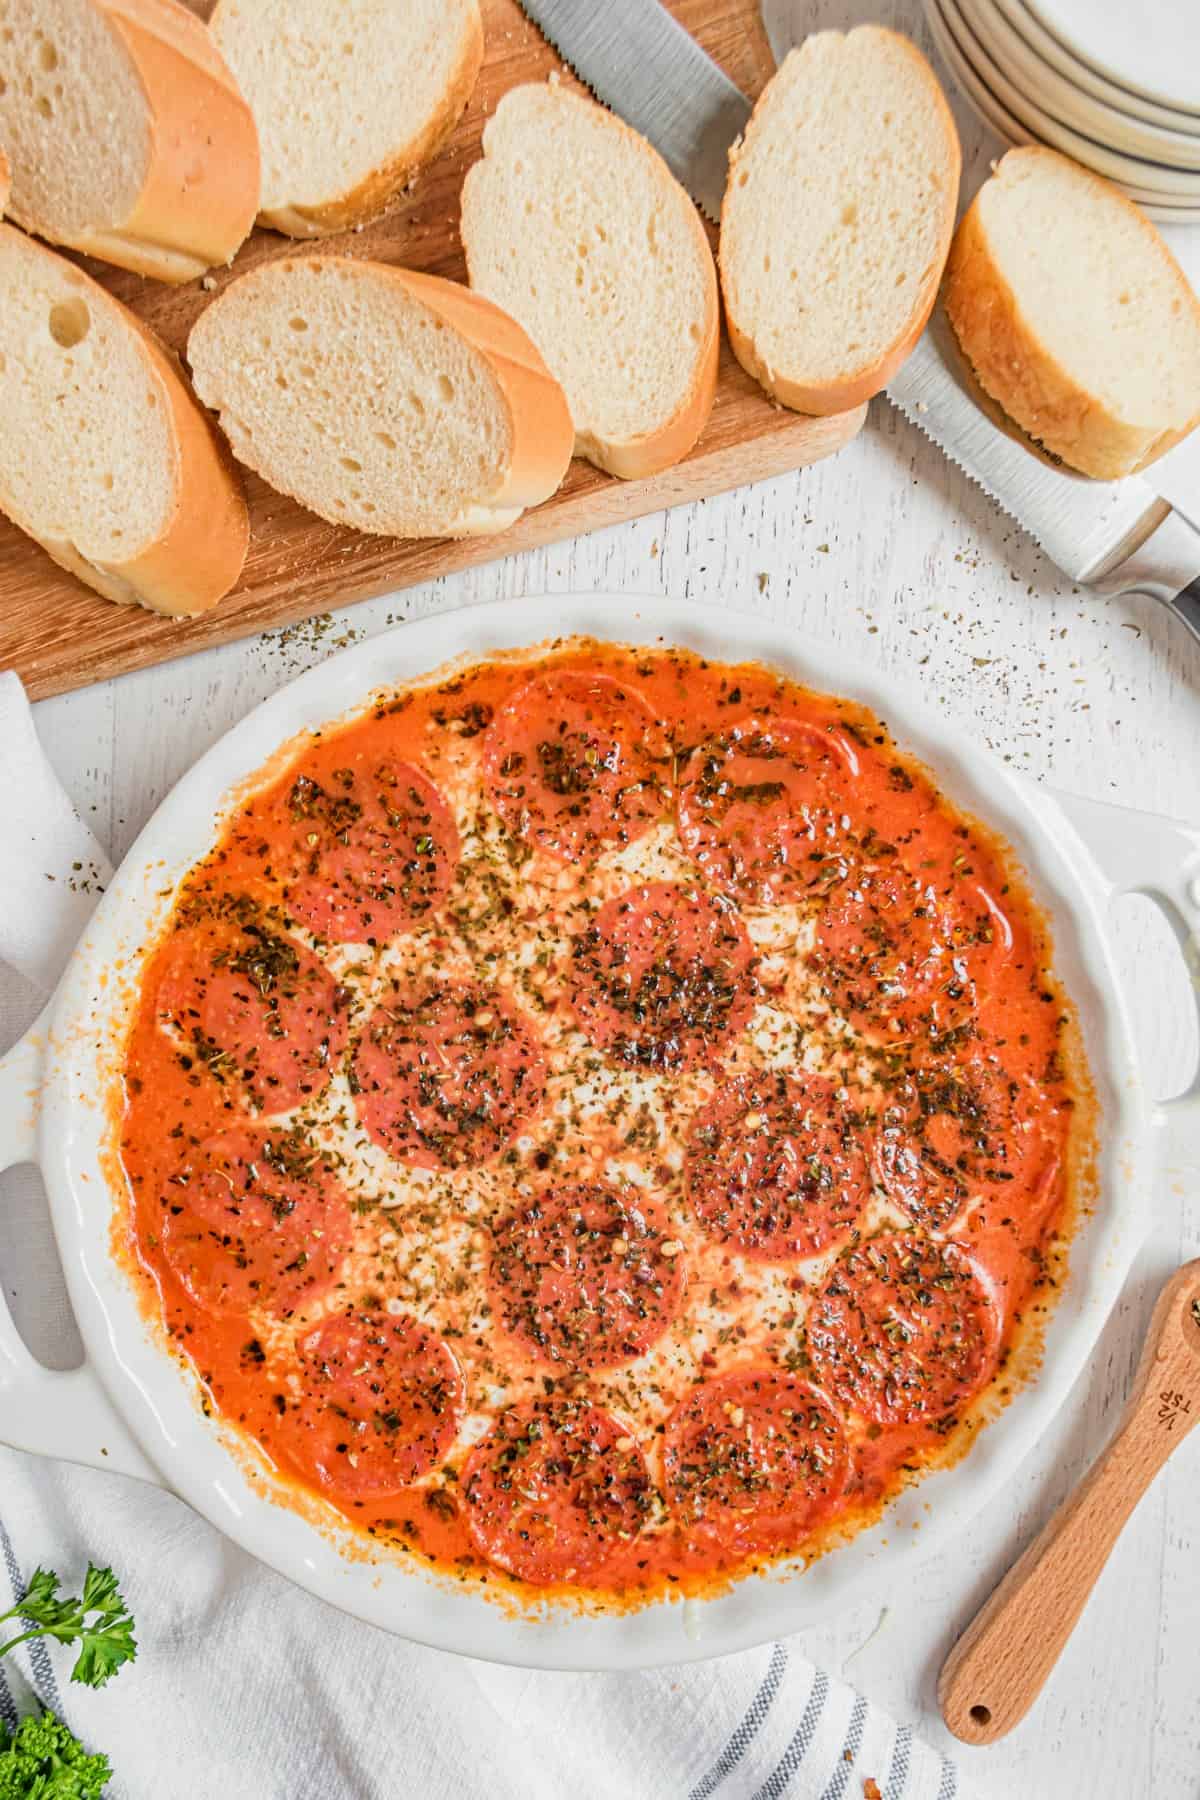 Pepperoni pizza dip in a white pie plate surrounded by sliced french bread for dipping.